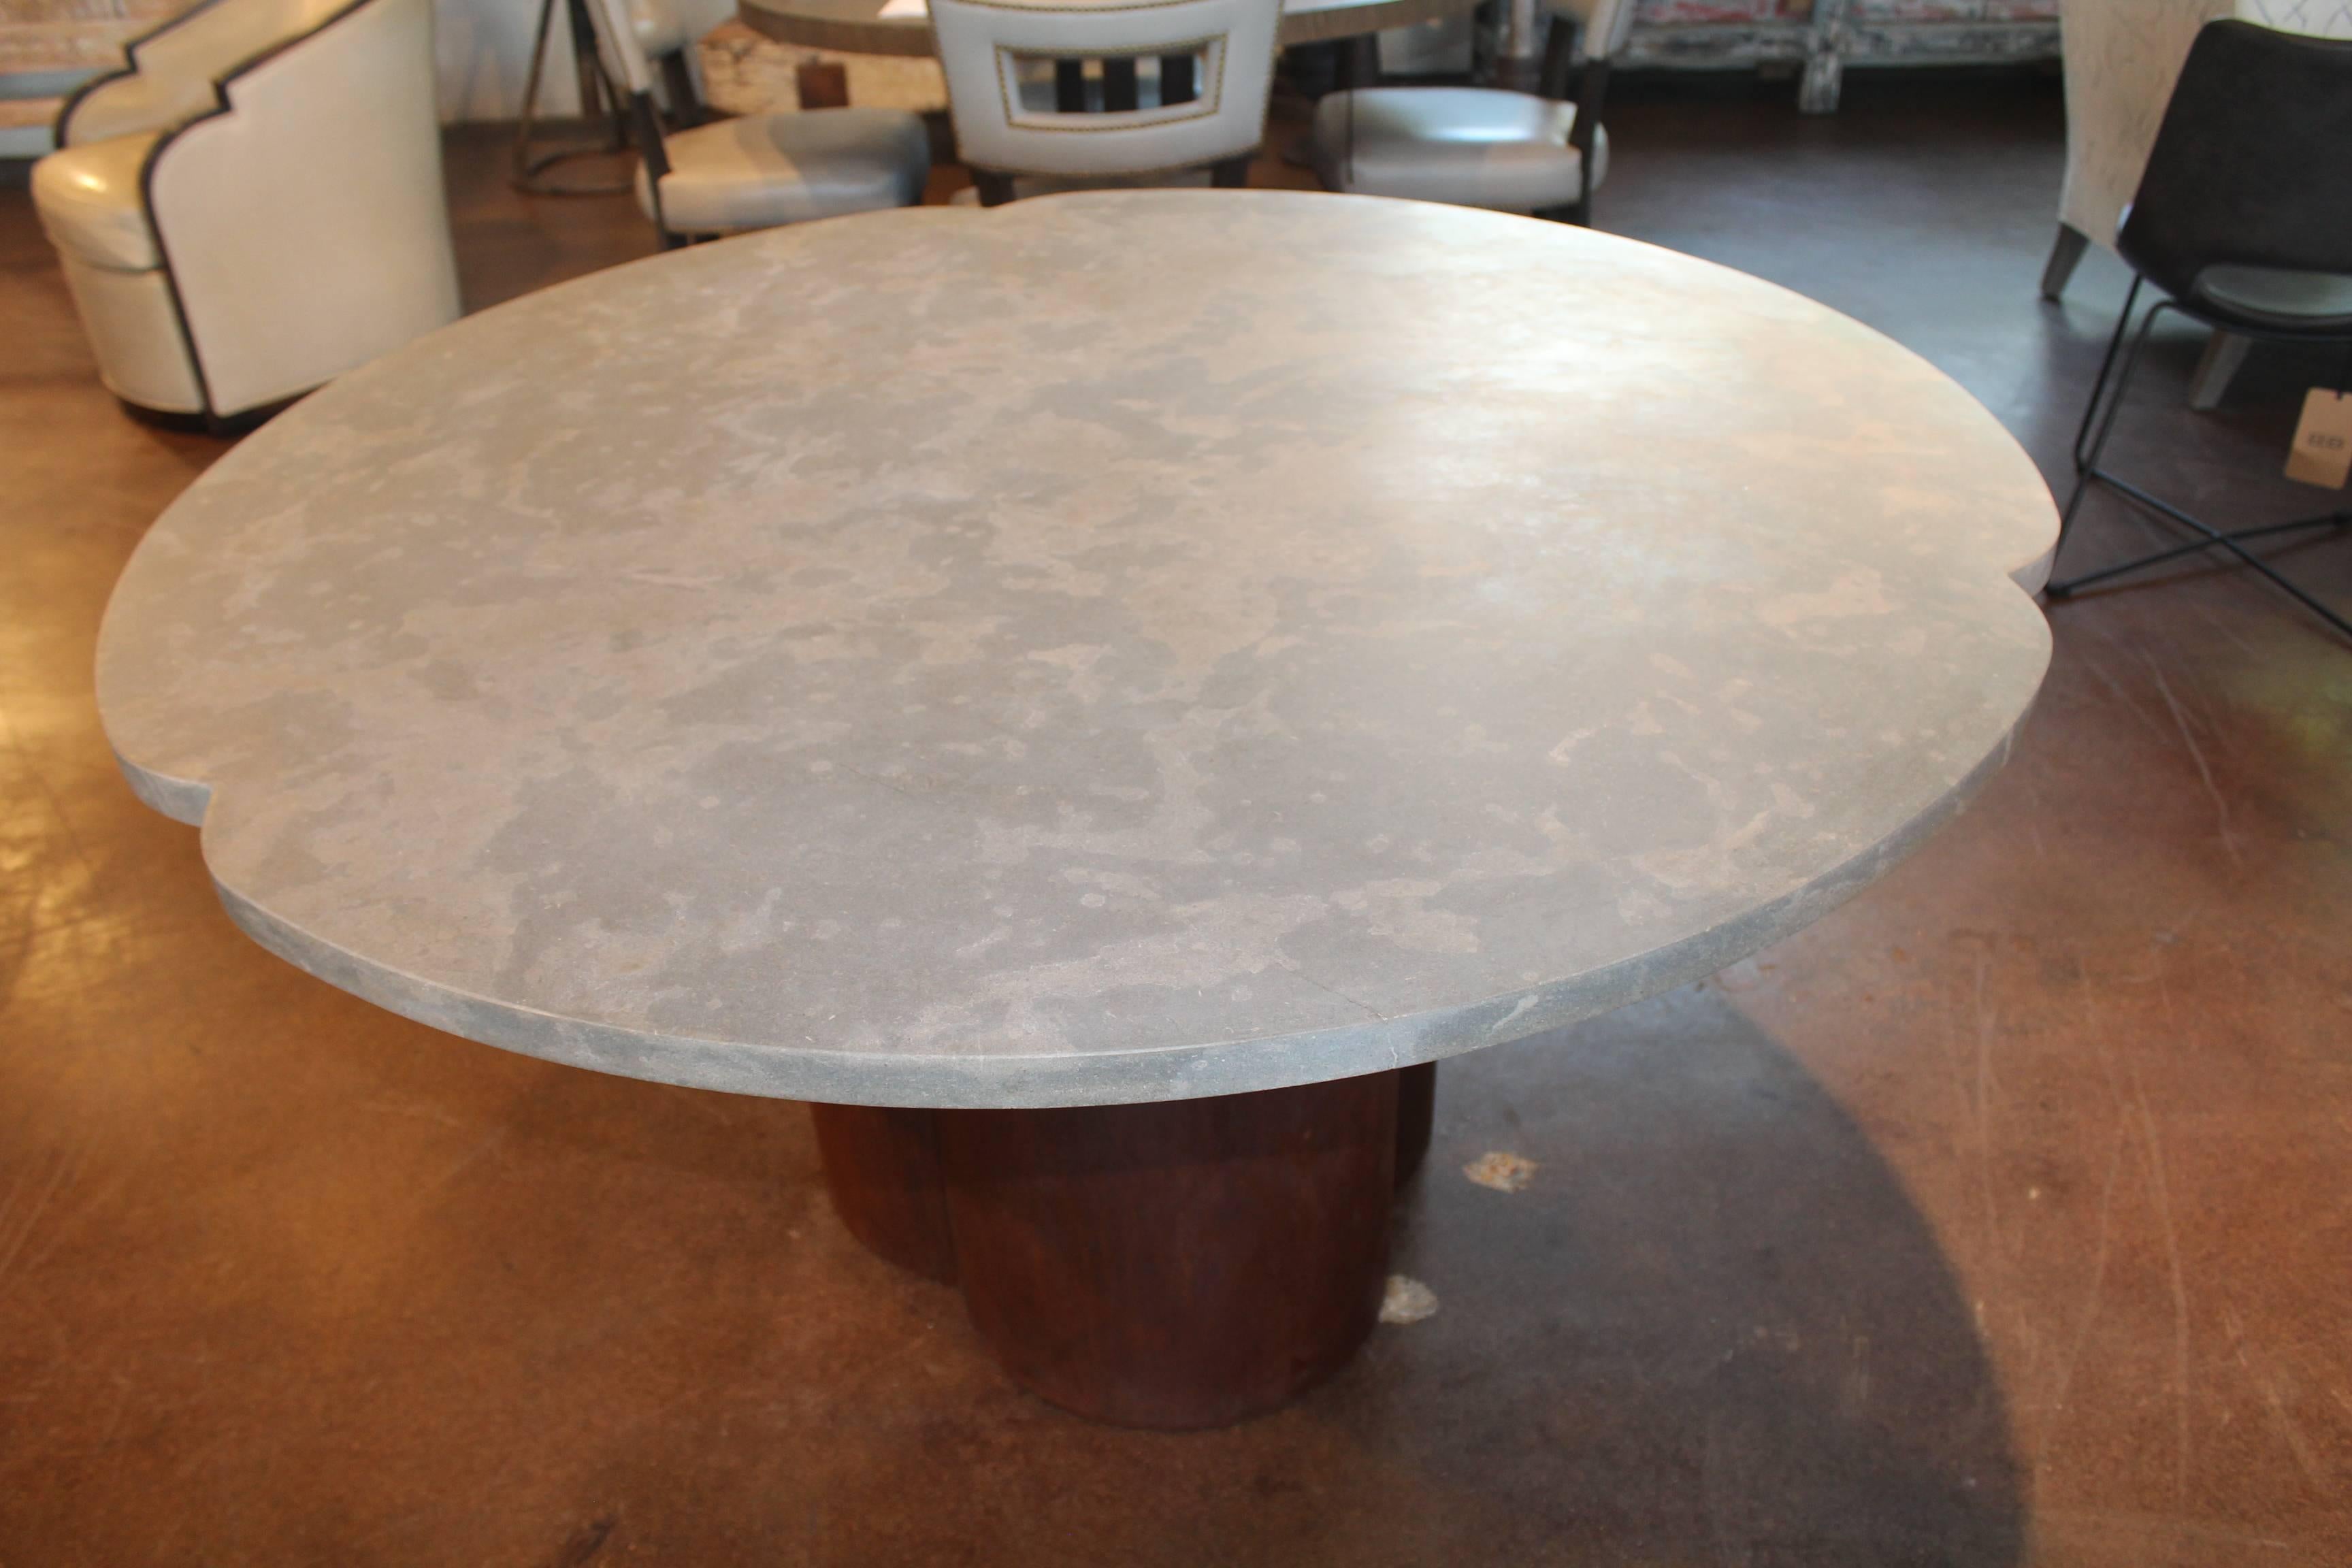 Patinated Clover Shaped Italian Dining Table Base with Honed Lagos Azul Limestone Top